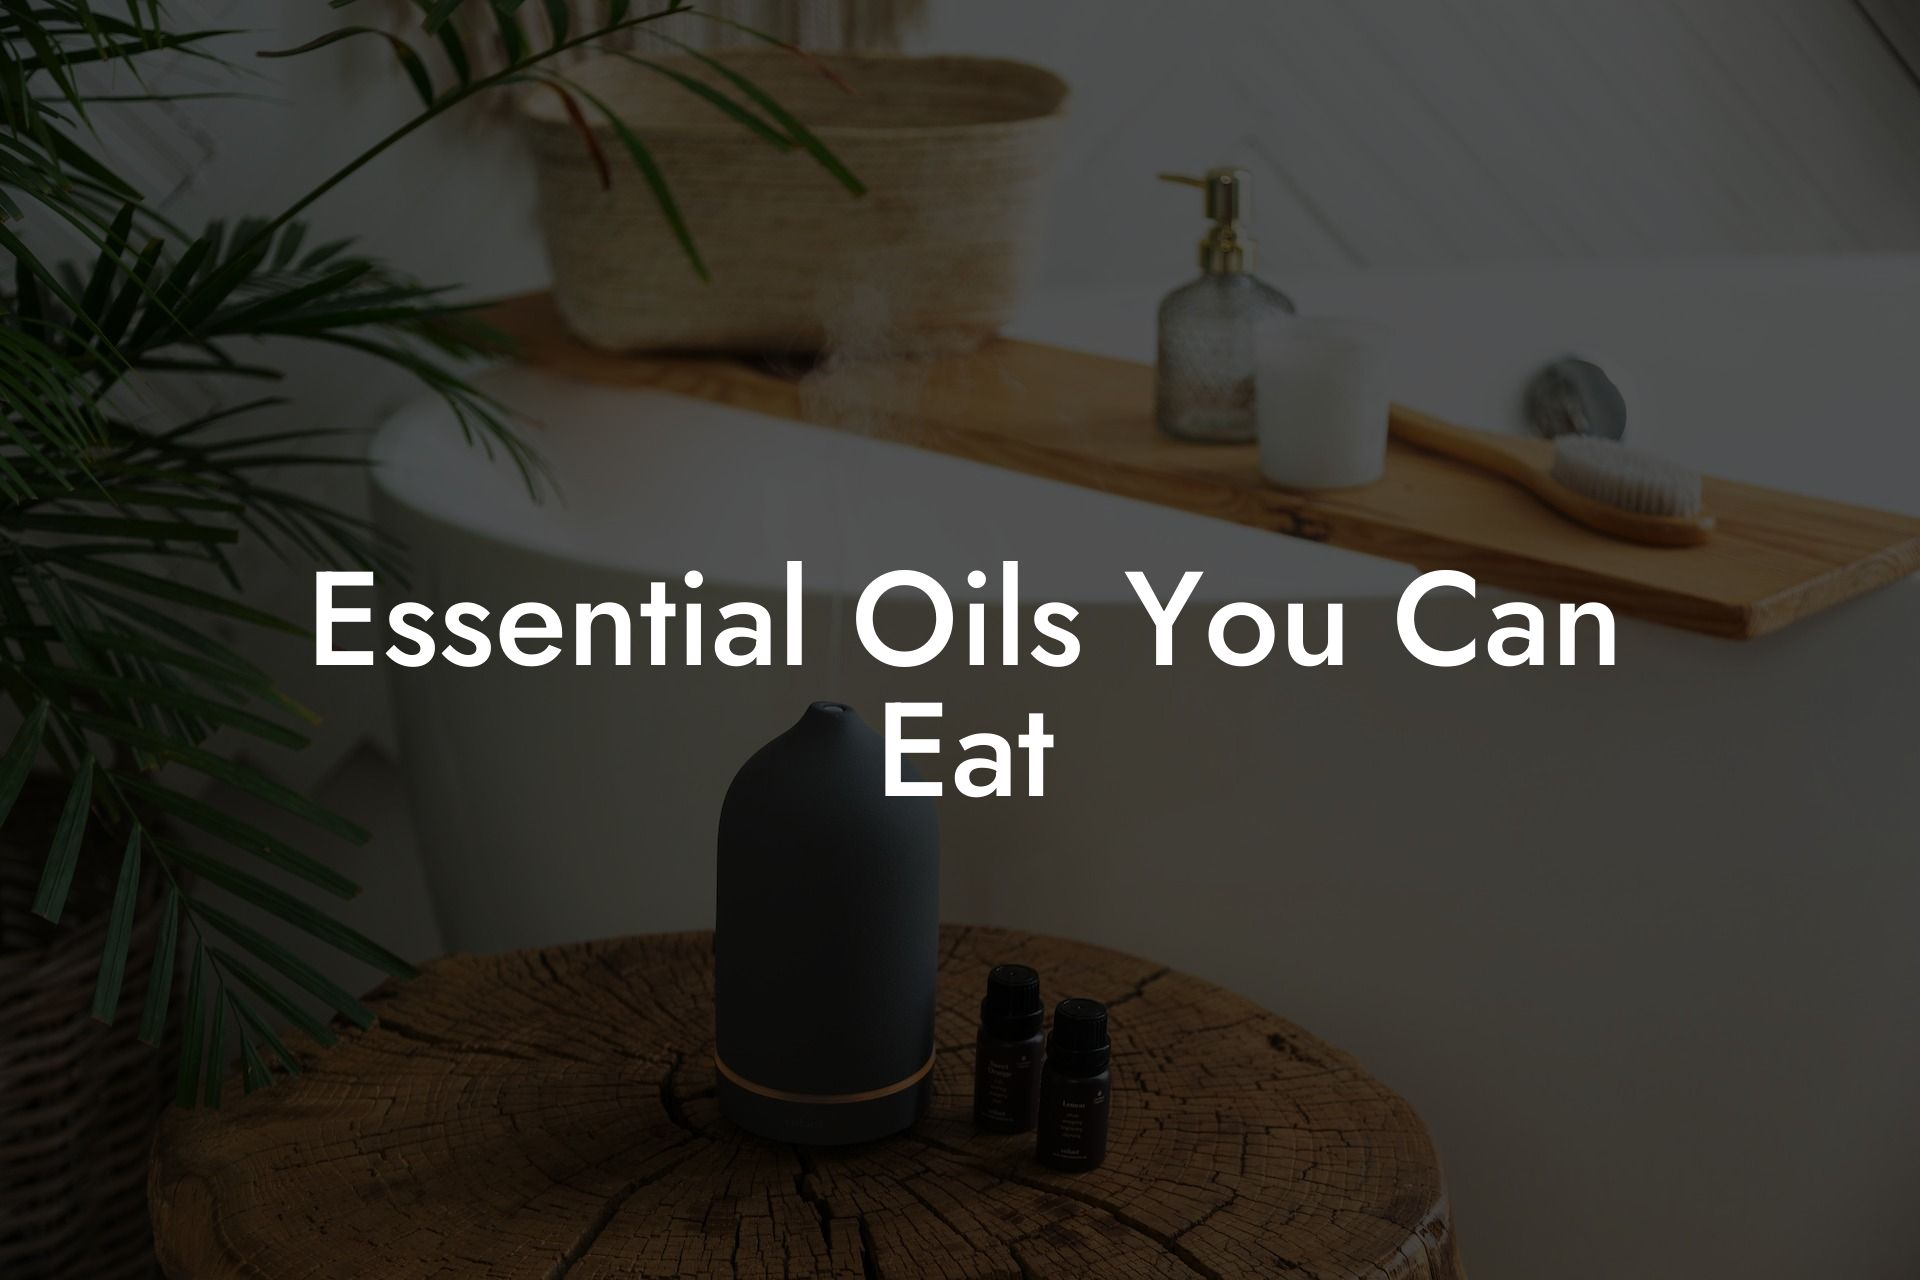 Essential Oils You Can Eat